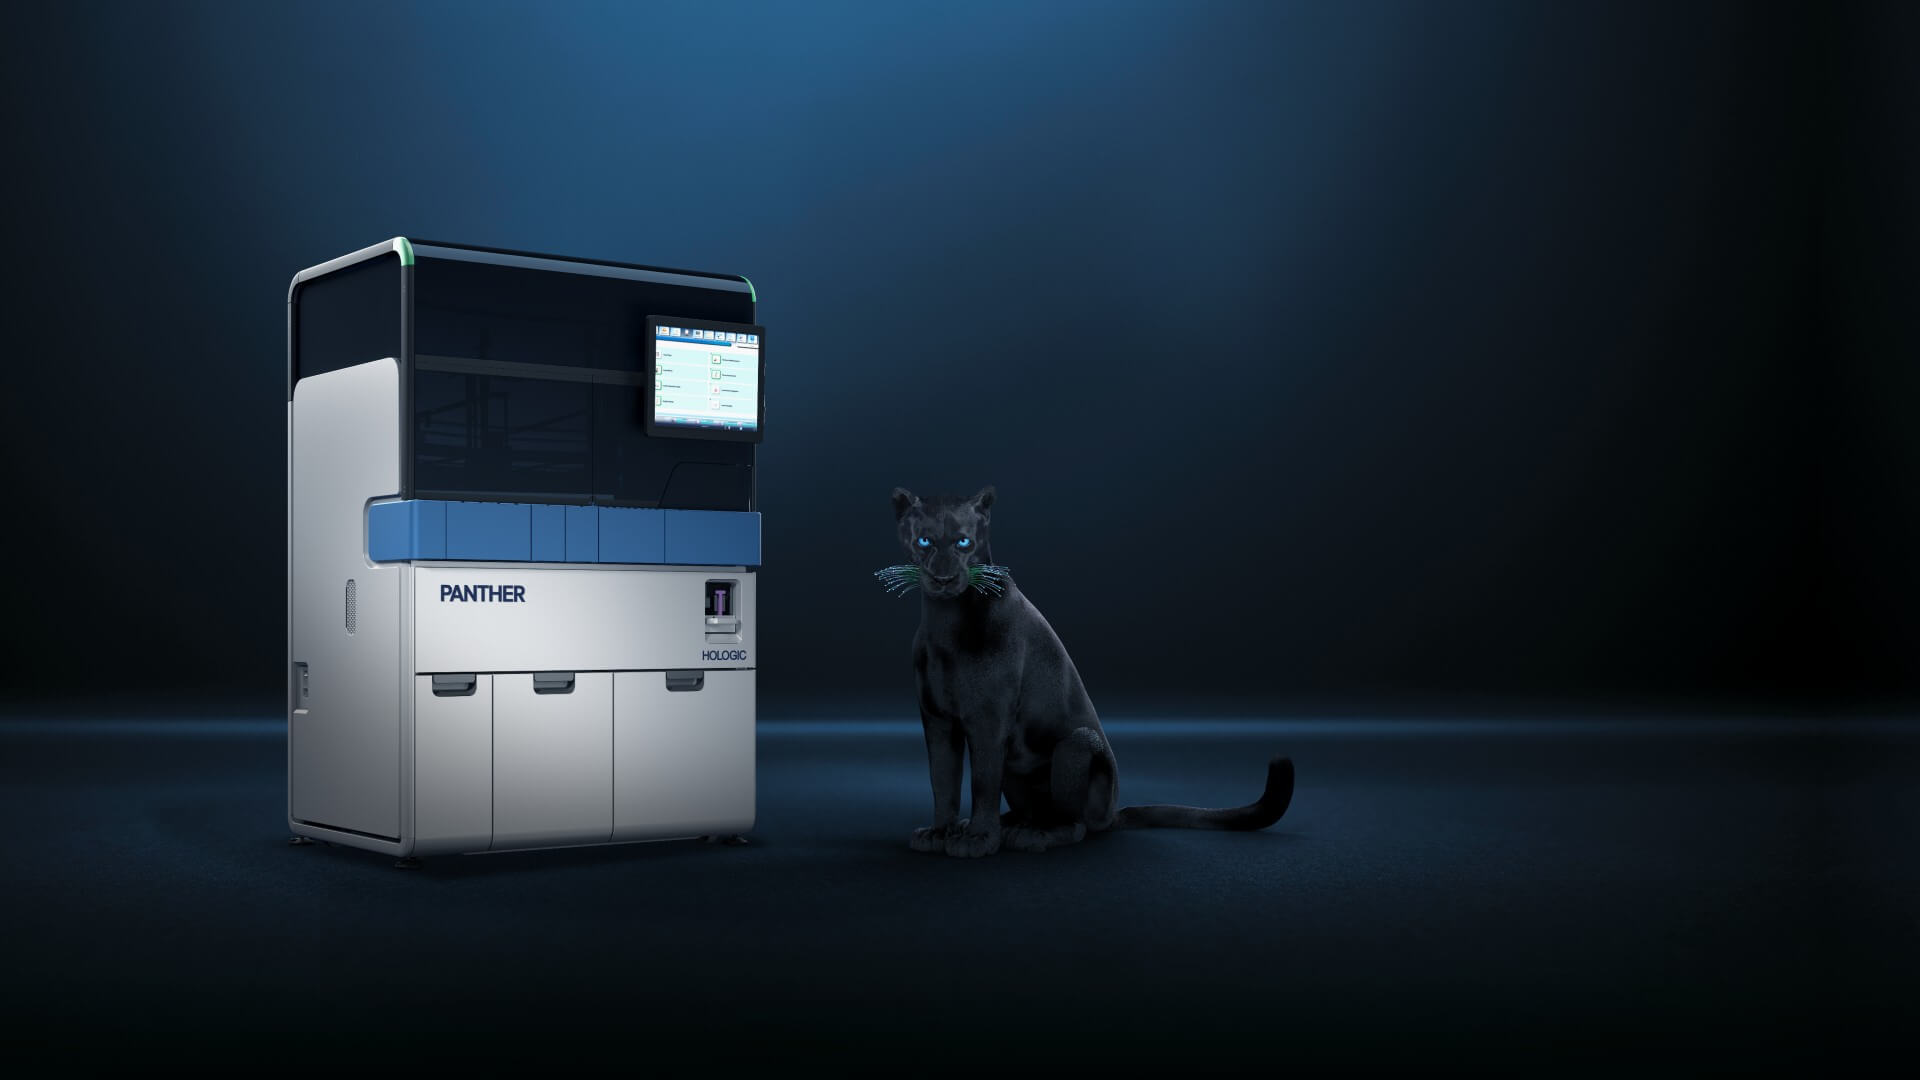 Hologic Panther sat infront of Panther Machine